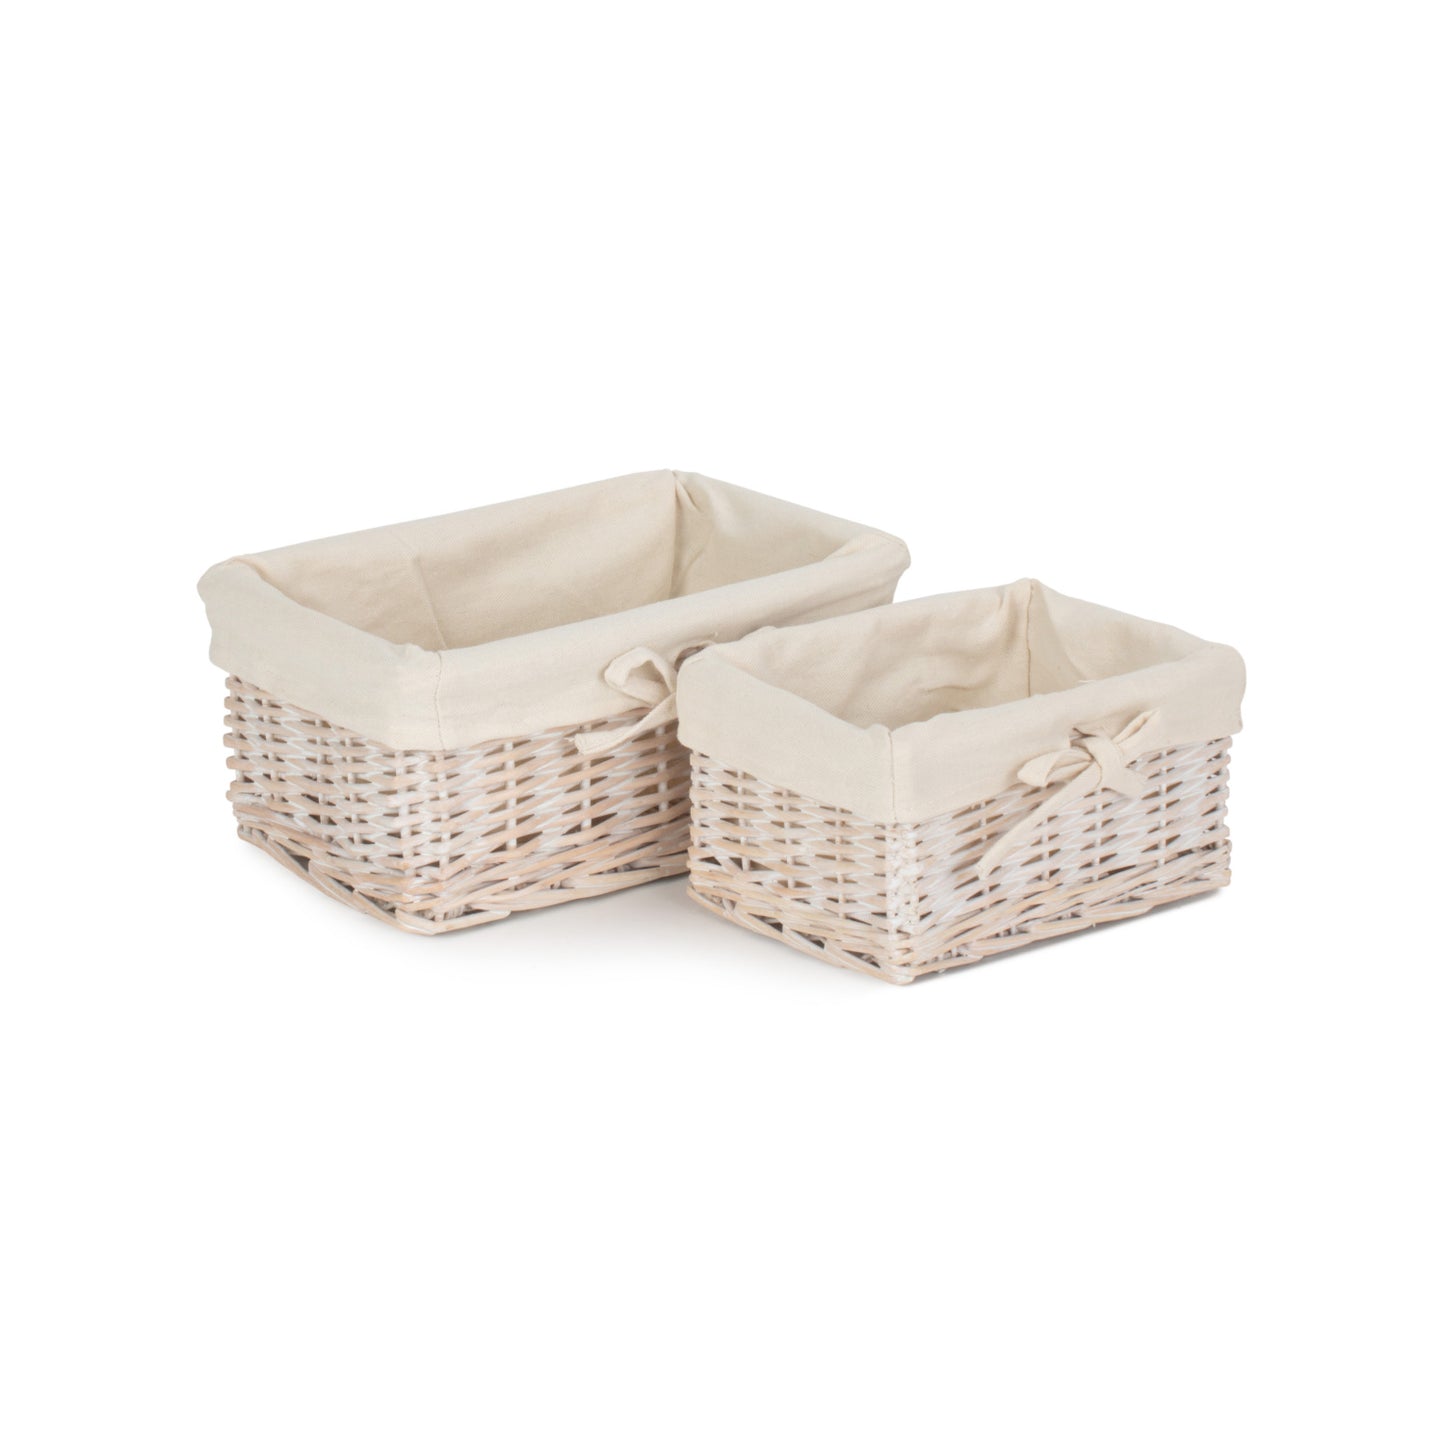 White Wash Finish Willow Tray With Lining Set 2